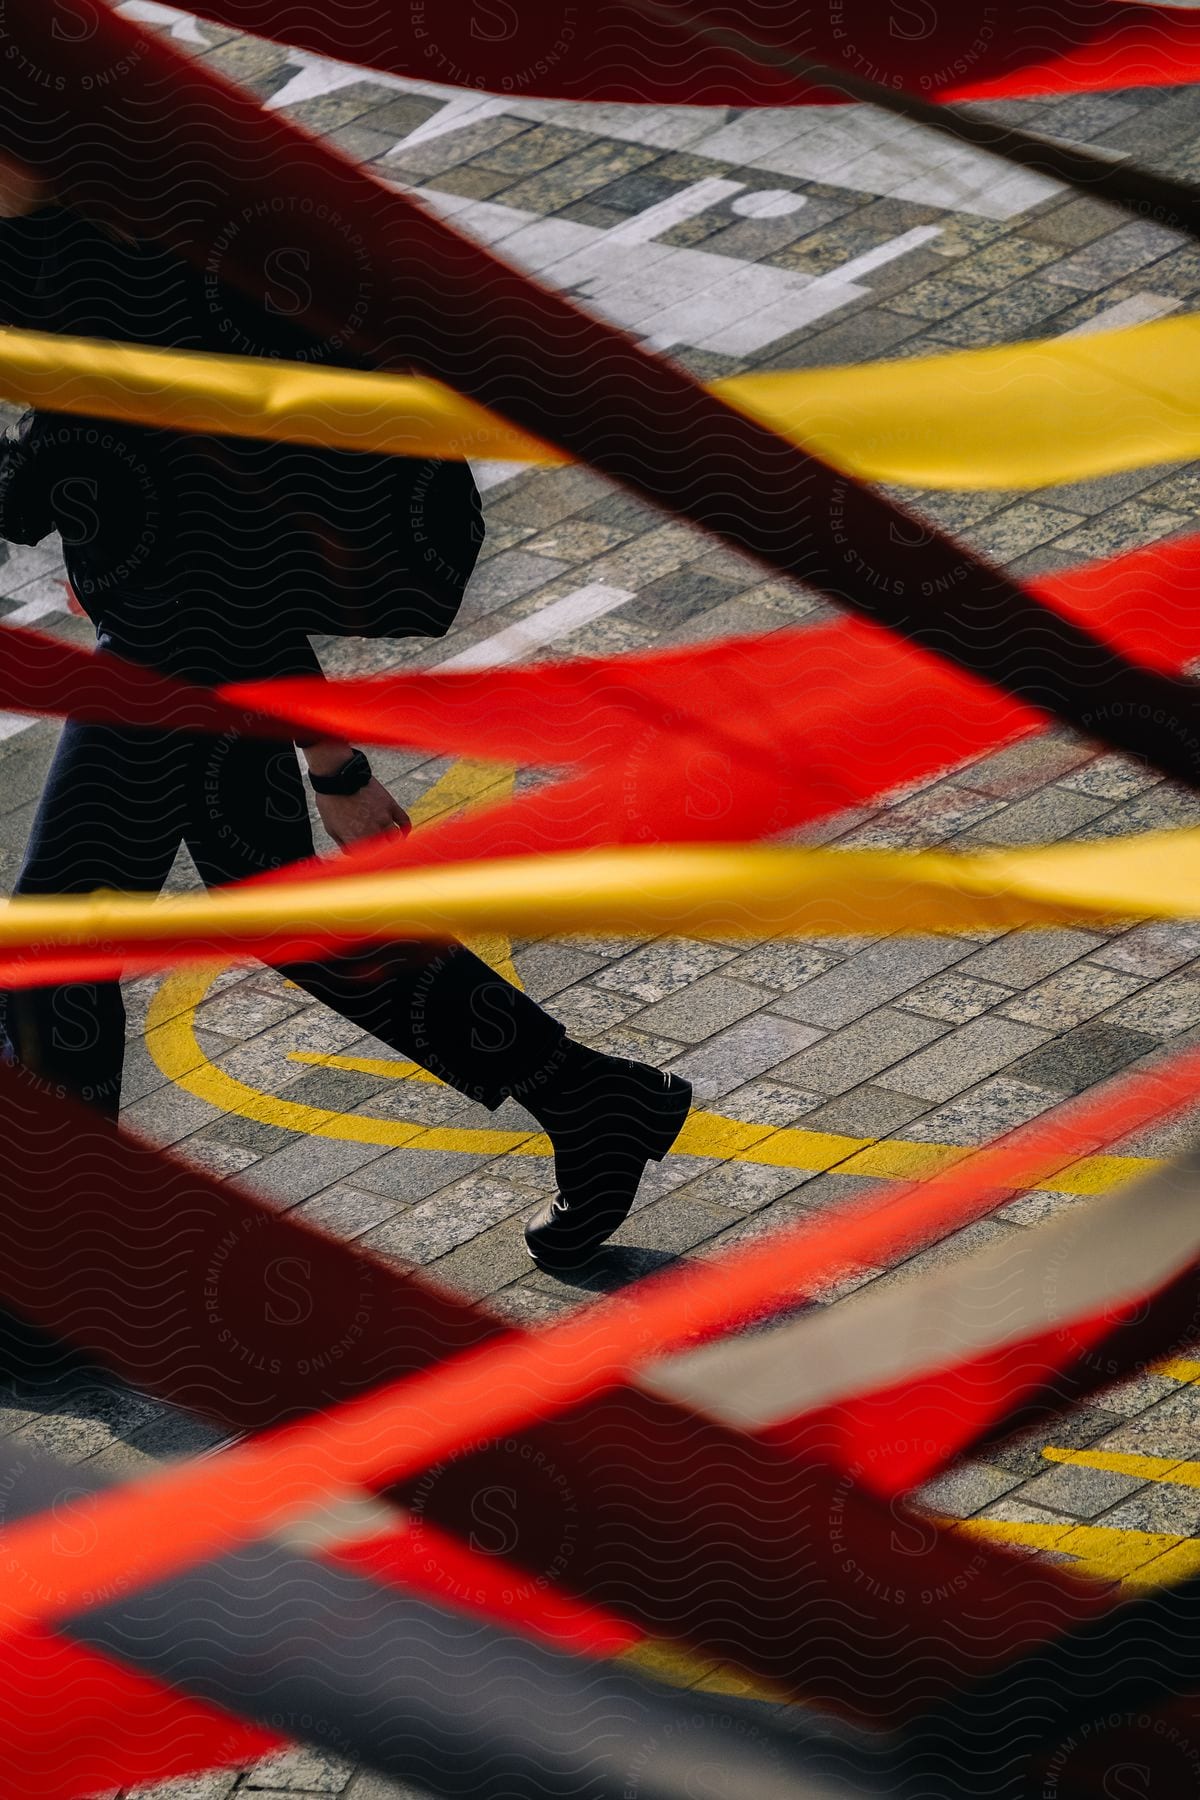 A person walks behind red and yellow ribbons streamed back and forth